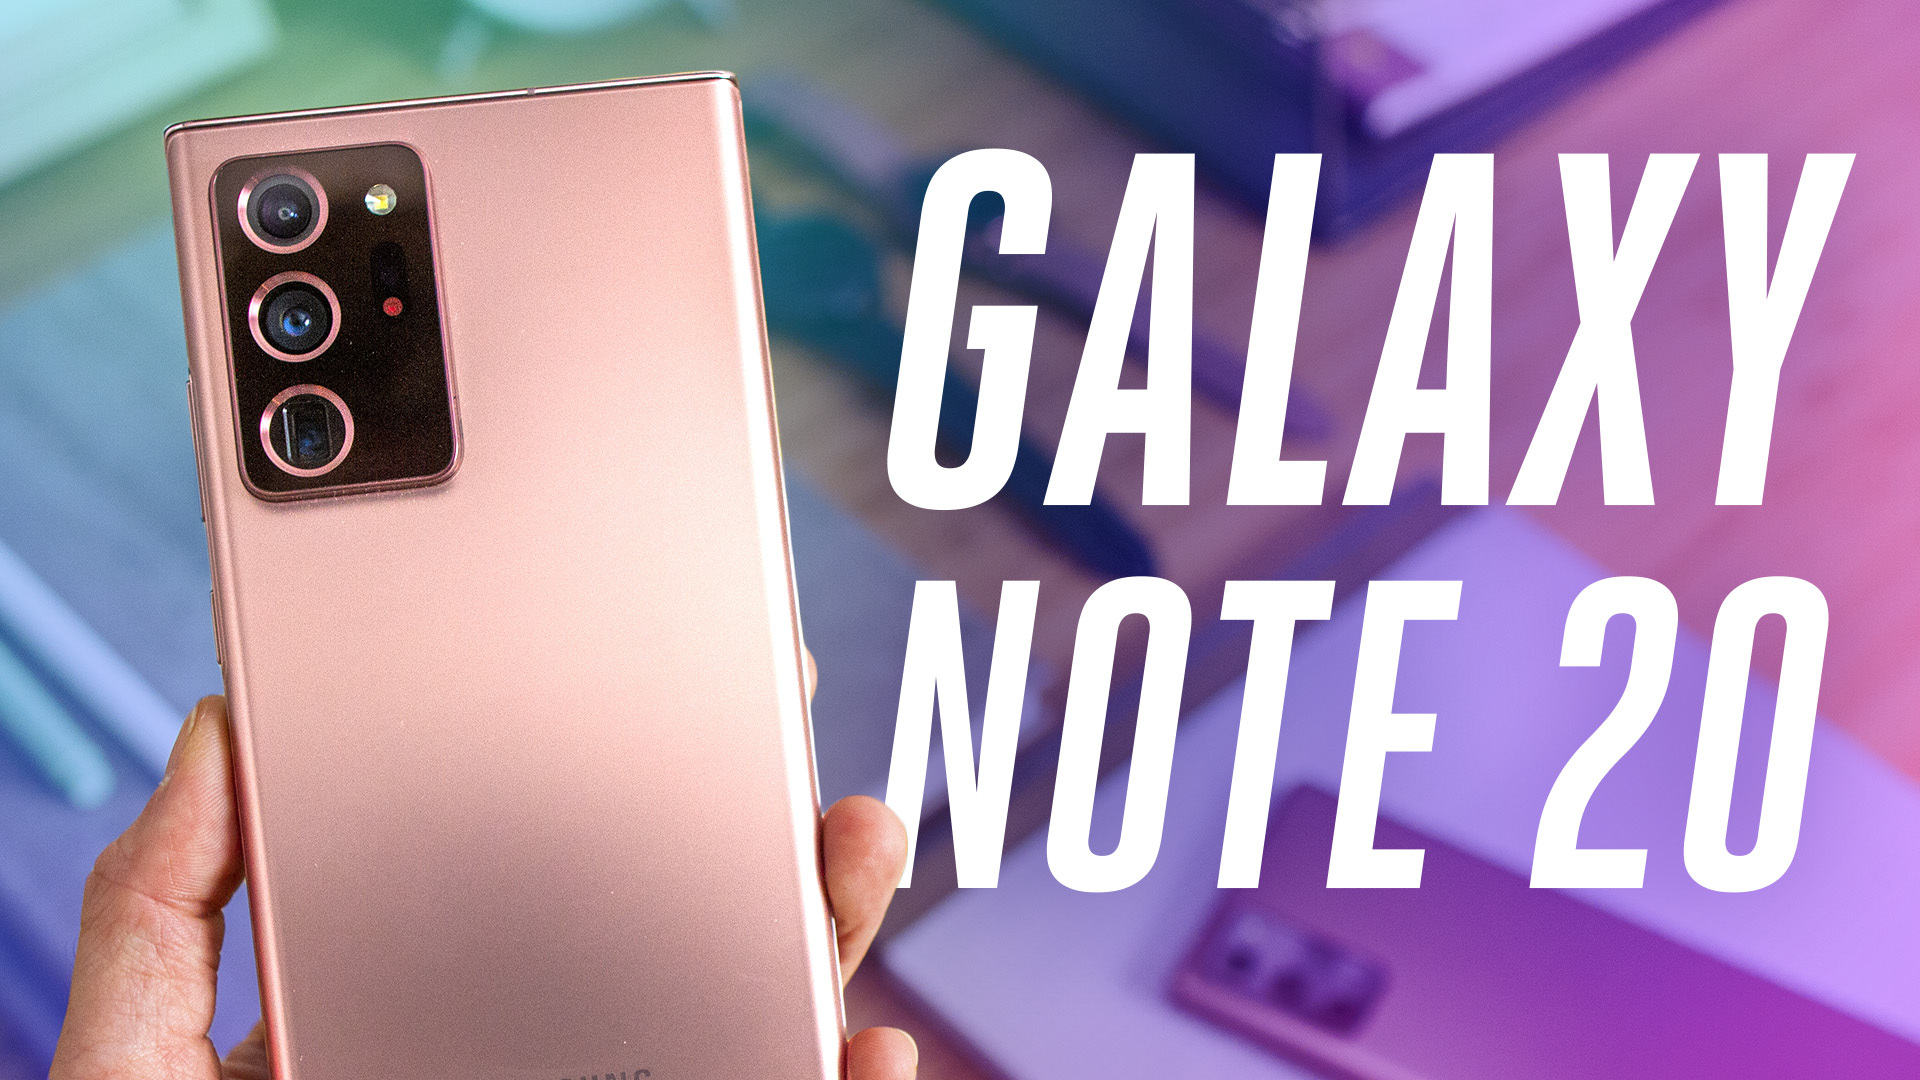 Samsung Galaxy Note 20: price, carriers and where to buy - The Verge